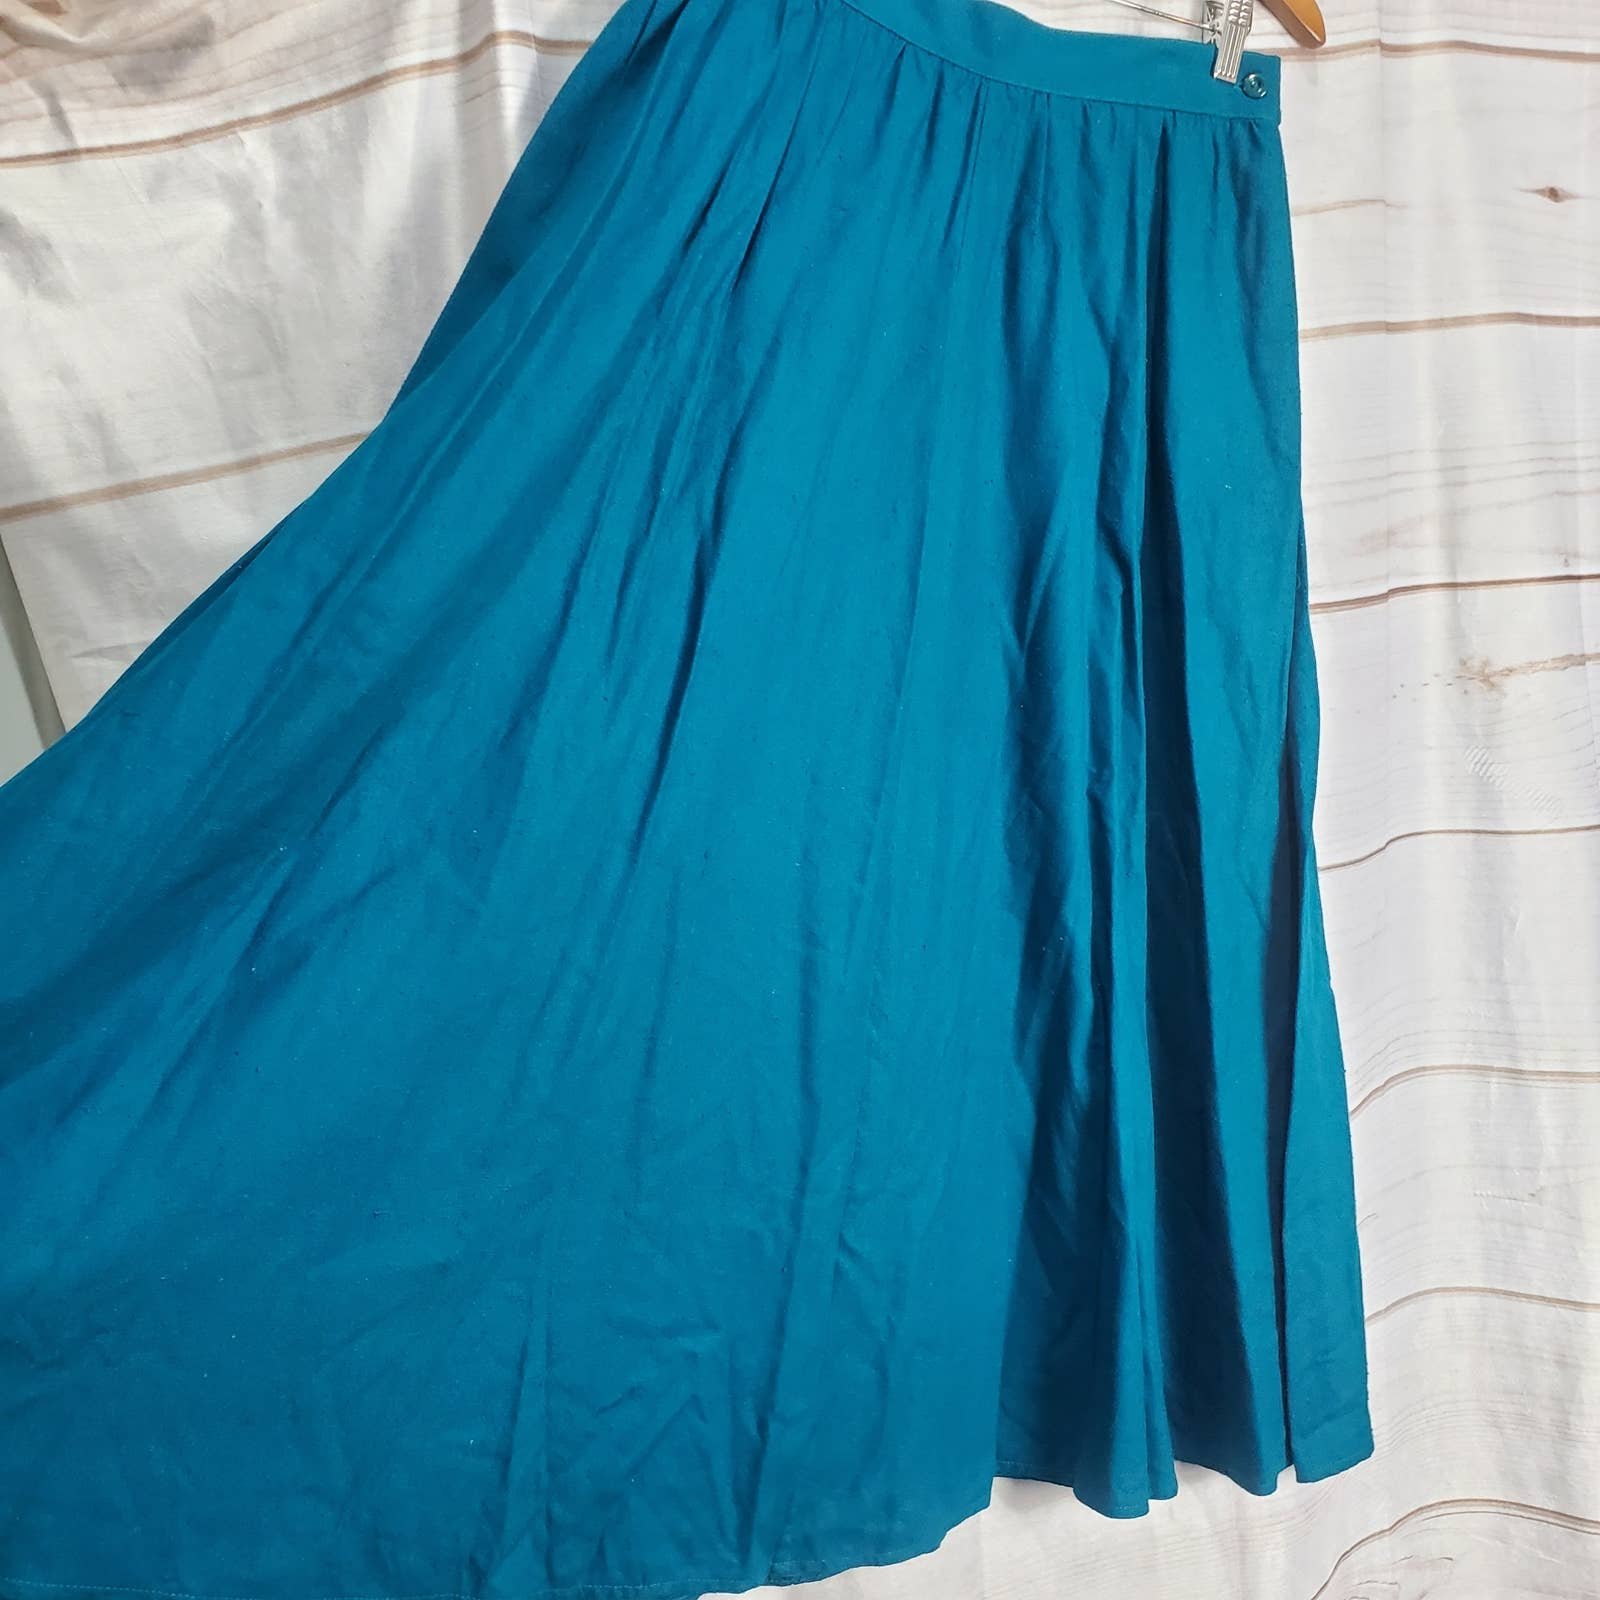 Great George Georgiou Skirt Womens Large Blue Silk Maxi Vintage 90s Pleated Pockets omotLCfyD outlet online shop